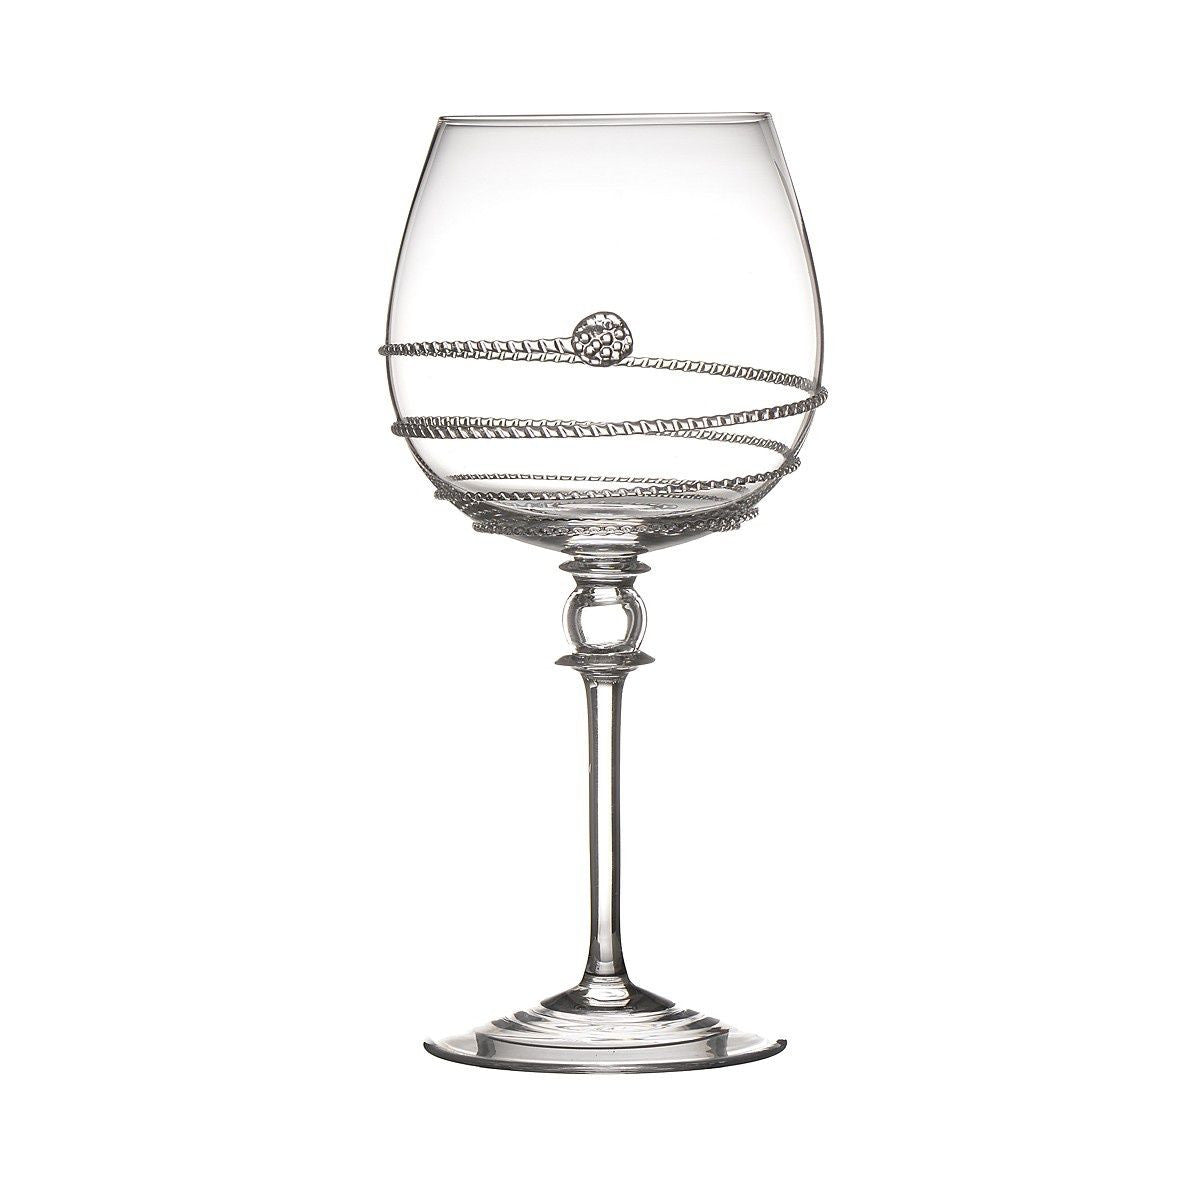 From our Amalia Collection - The ascending glass detailing on our Amalia Full Body Red Wine Glass mirrors the swirling vintage it contains. Ideal to allow the bouquet to develop completely, our wine glass is perfect for full-bodied wine such as Cabernet Sauvignon, Merlots and Malbecs.